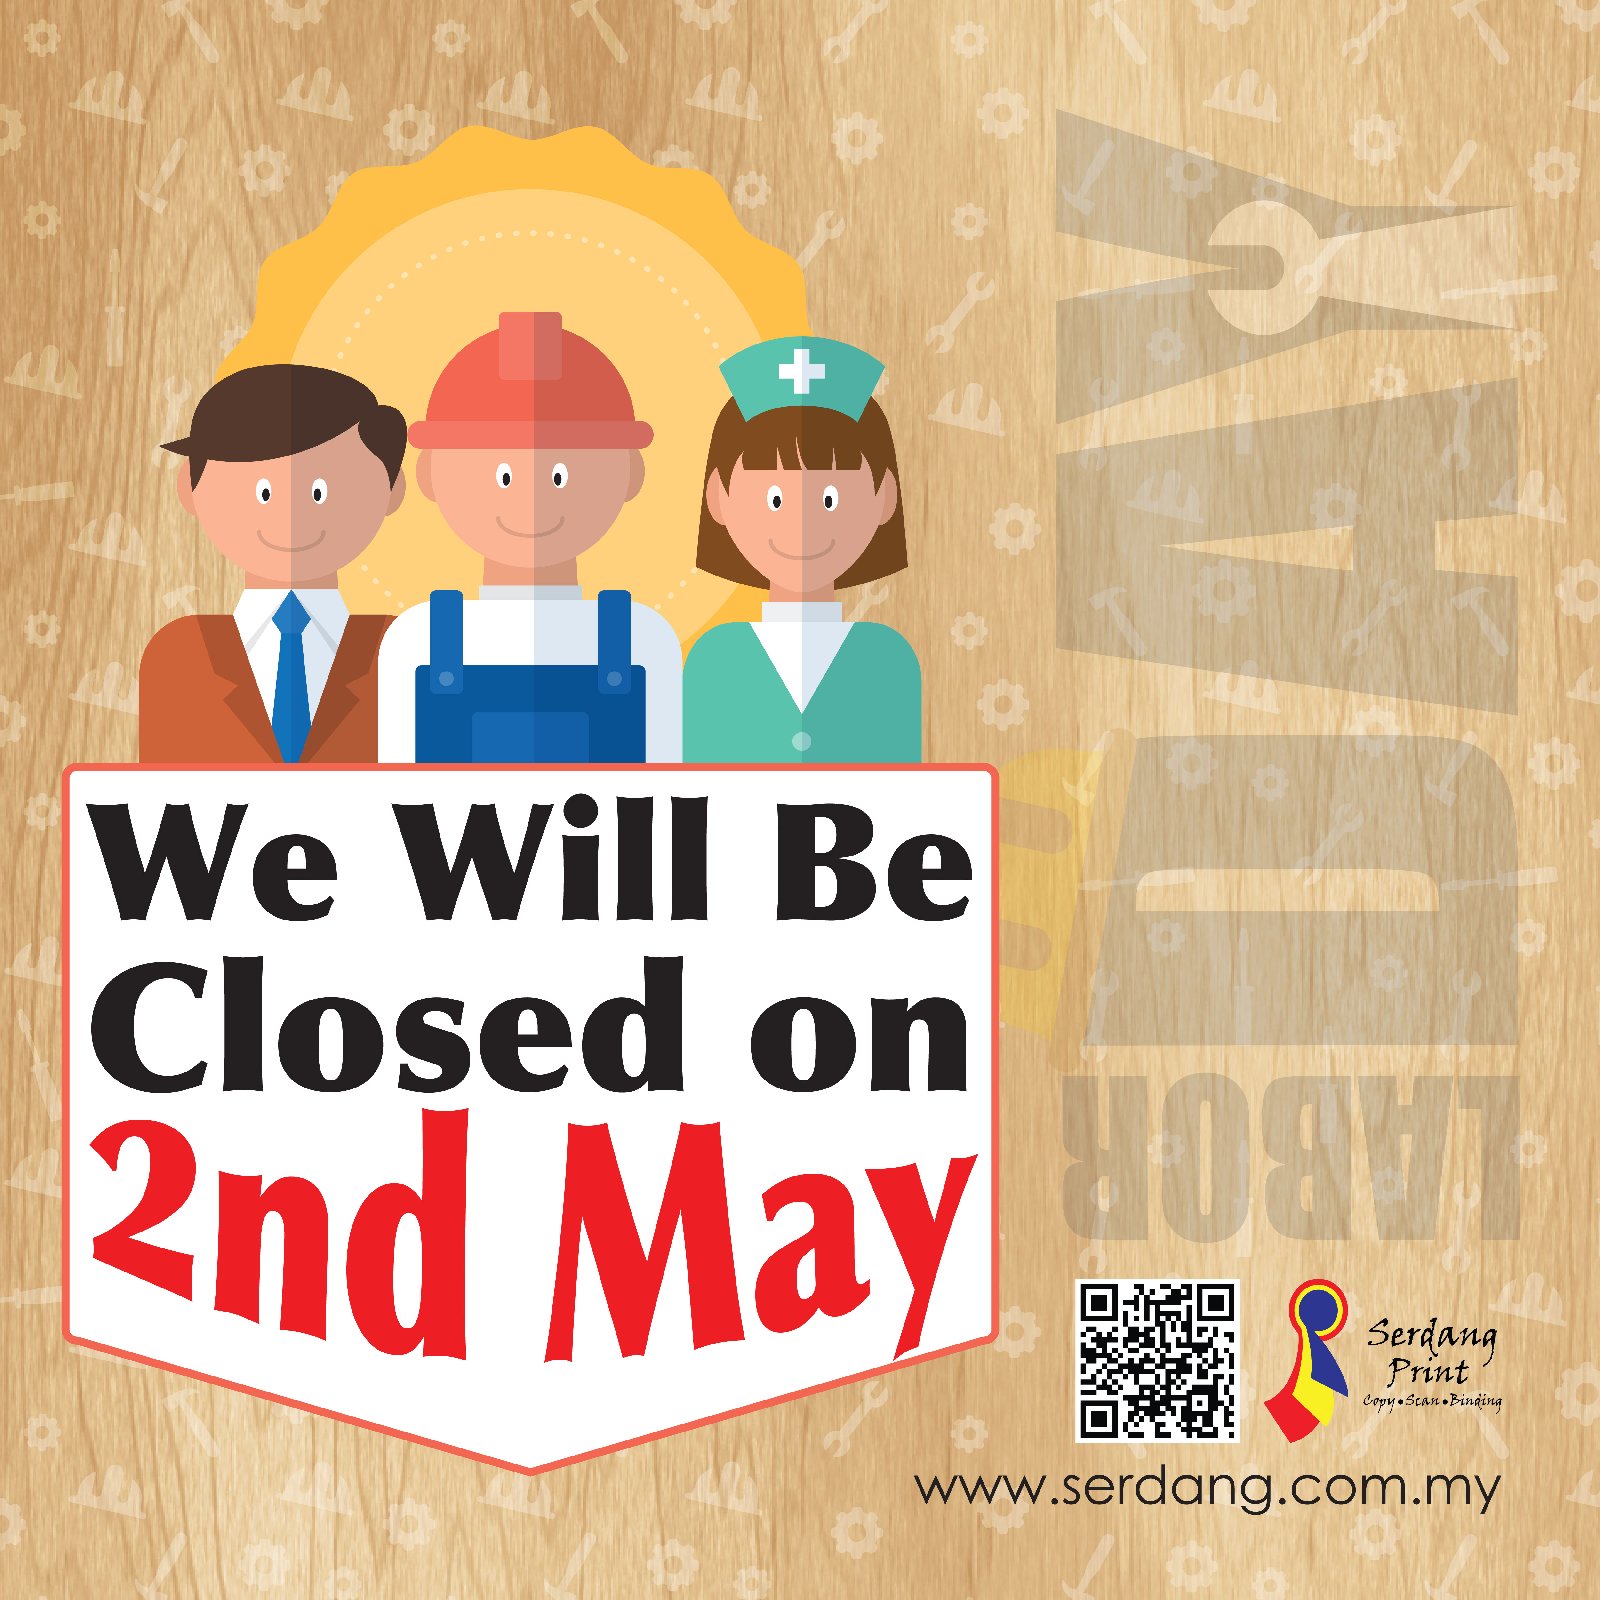 We will closed on 2nd May... Sorry for any inconvenience...